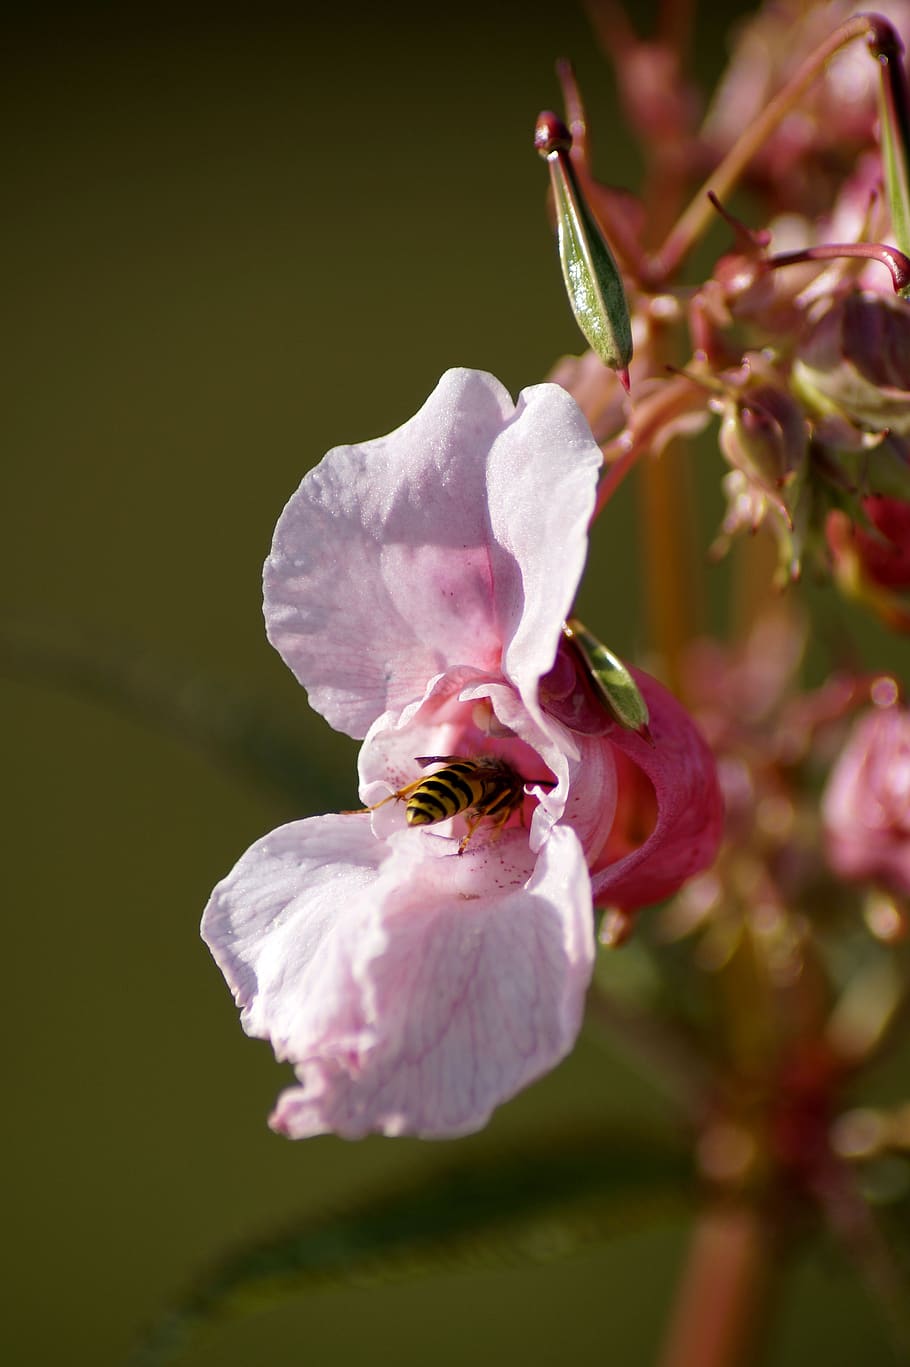 indian springkraut, himalayan balsam, wasp, insect, annual, wild flower, red spring herb, pink, blossom, bloom